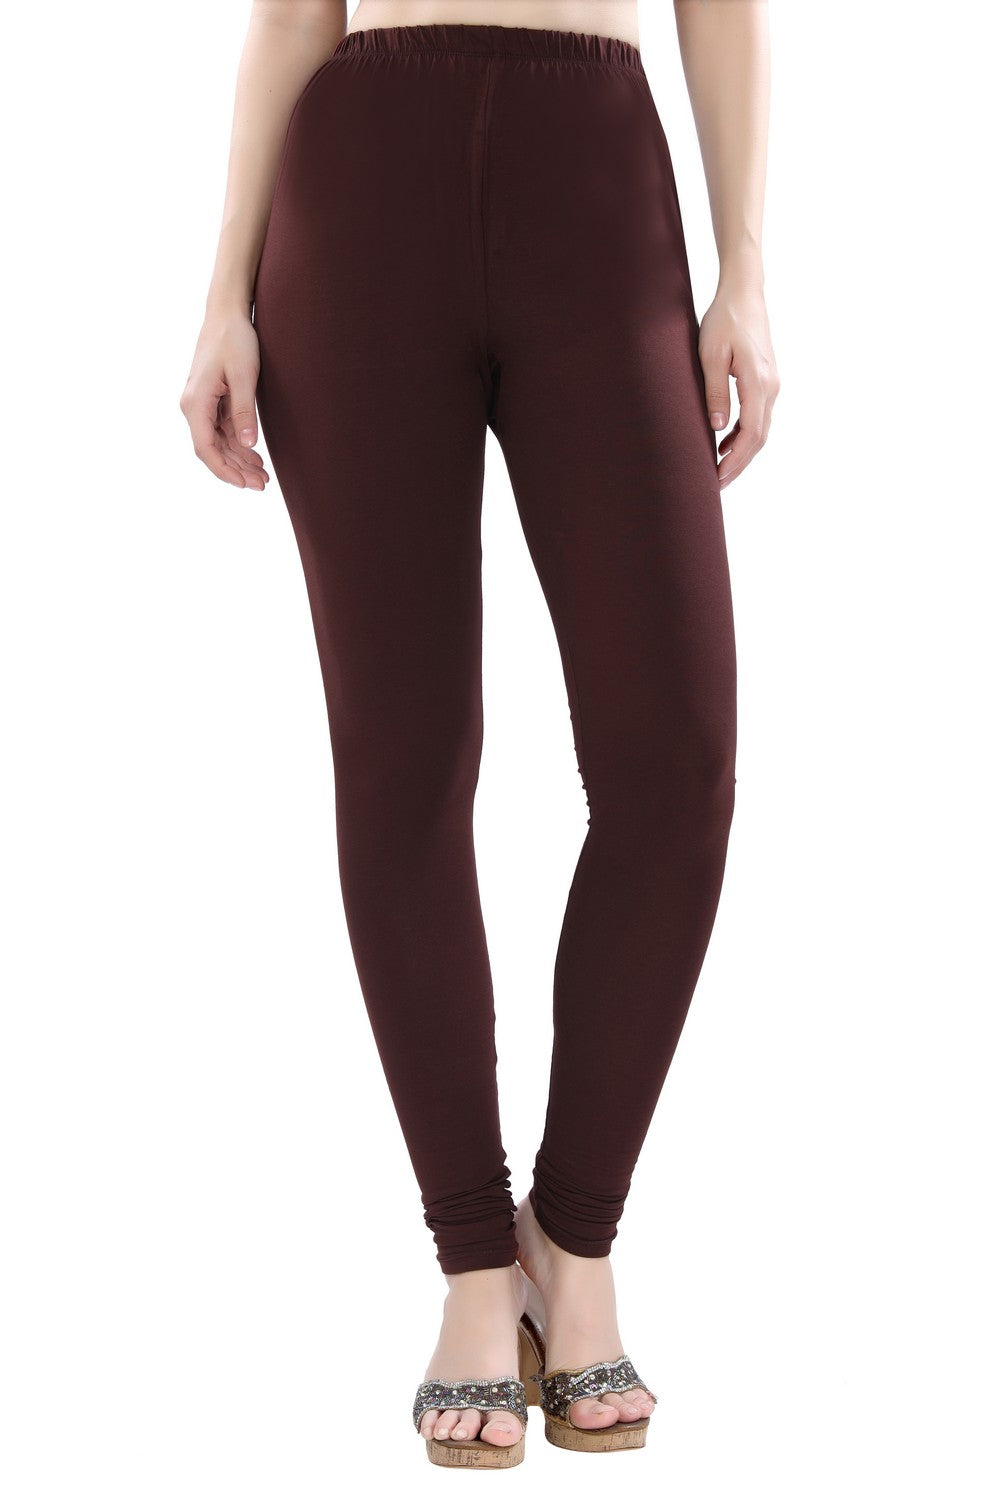 SSAAVKUY Womens Ladies Solid Color Leggings High Waisted Pocket Yoga Pants  Loose Fitness Workout Exercise Trousers 2023 Brown XXL - Walmart.com